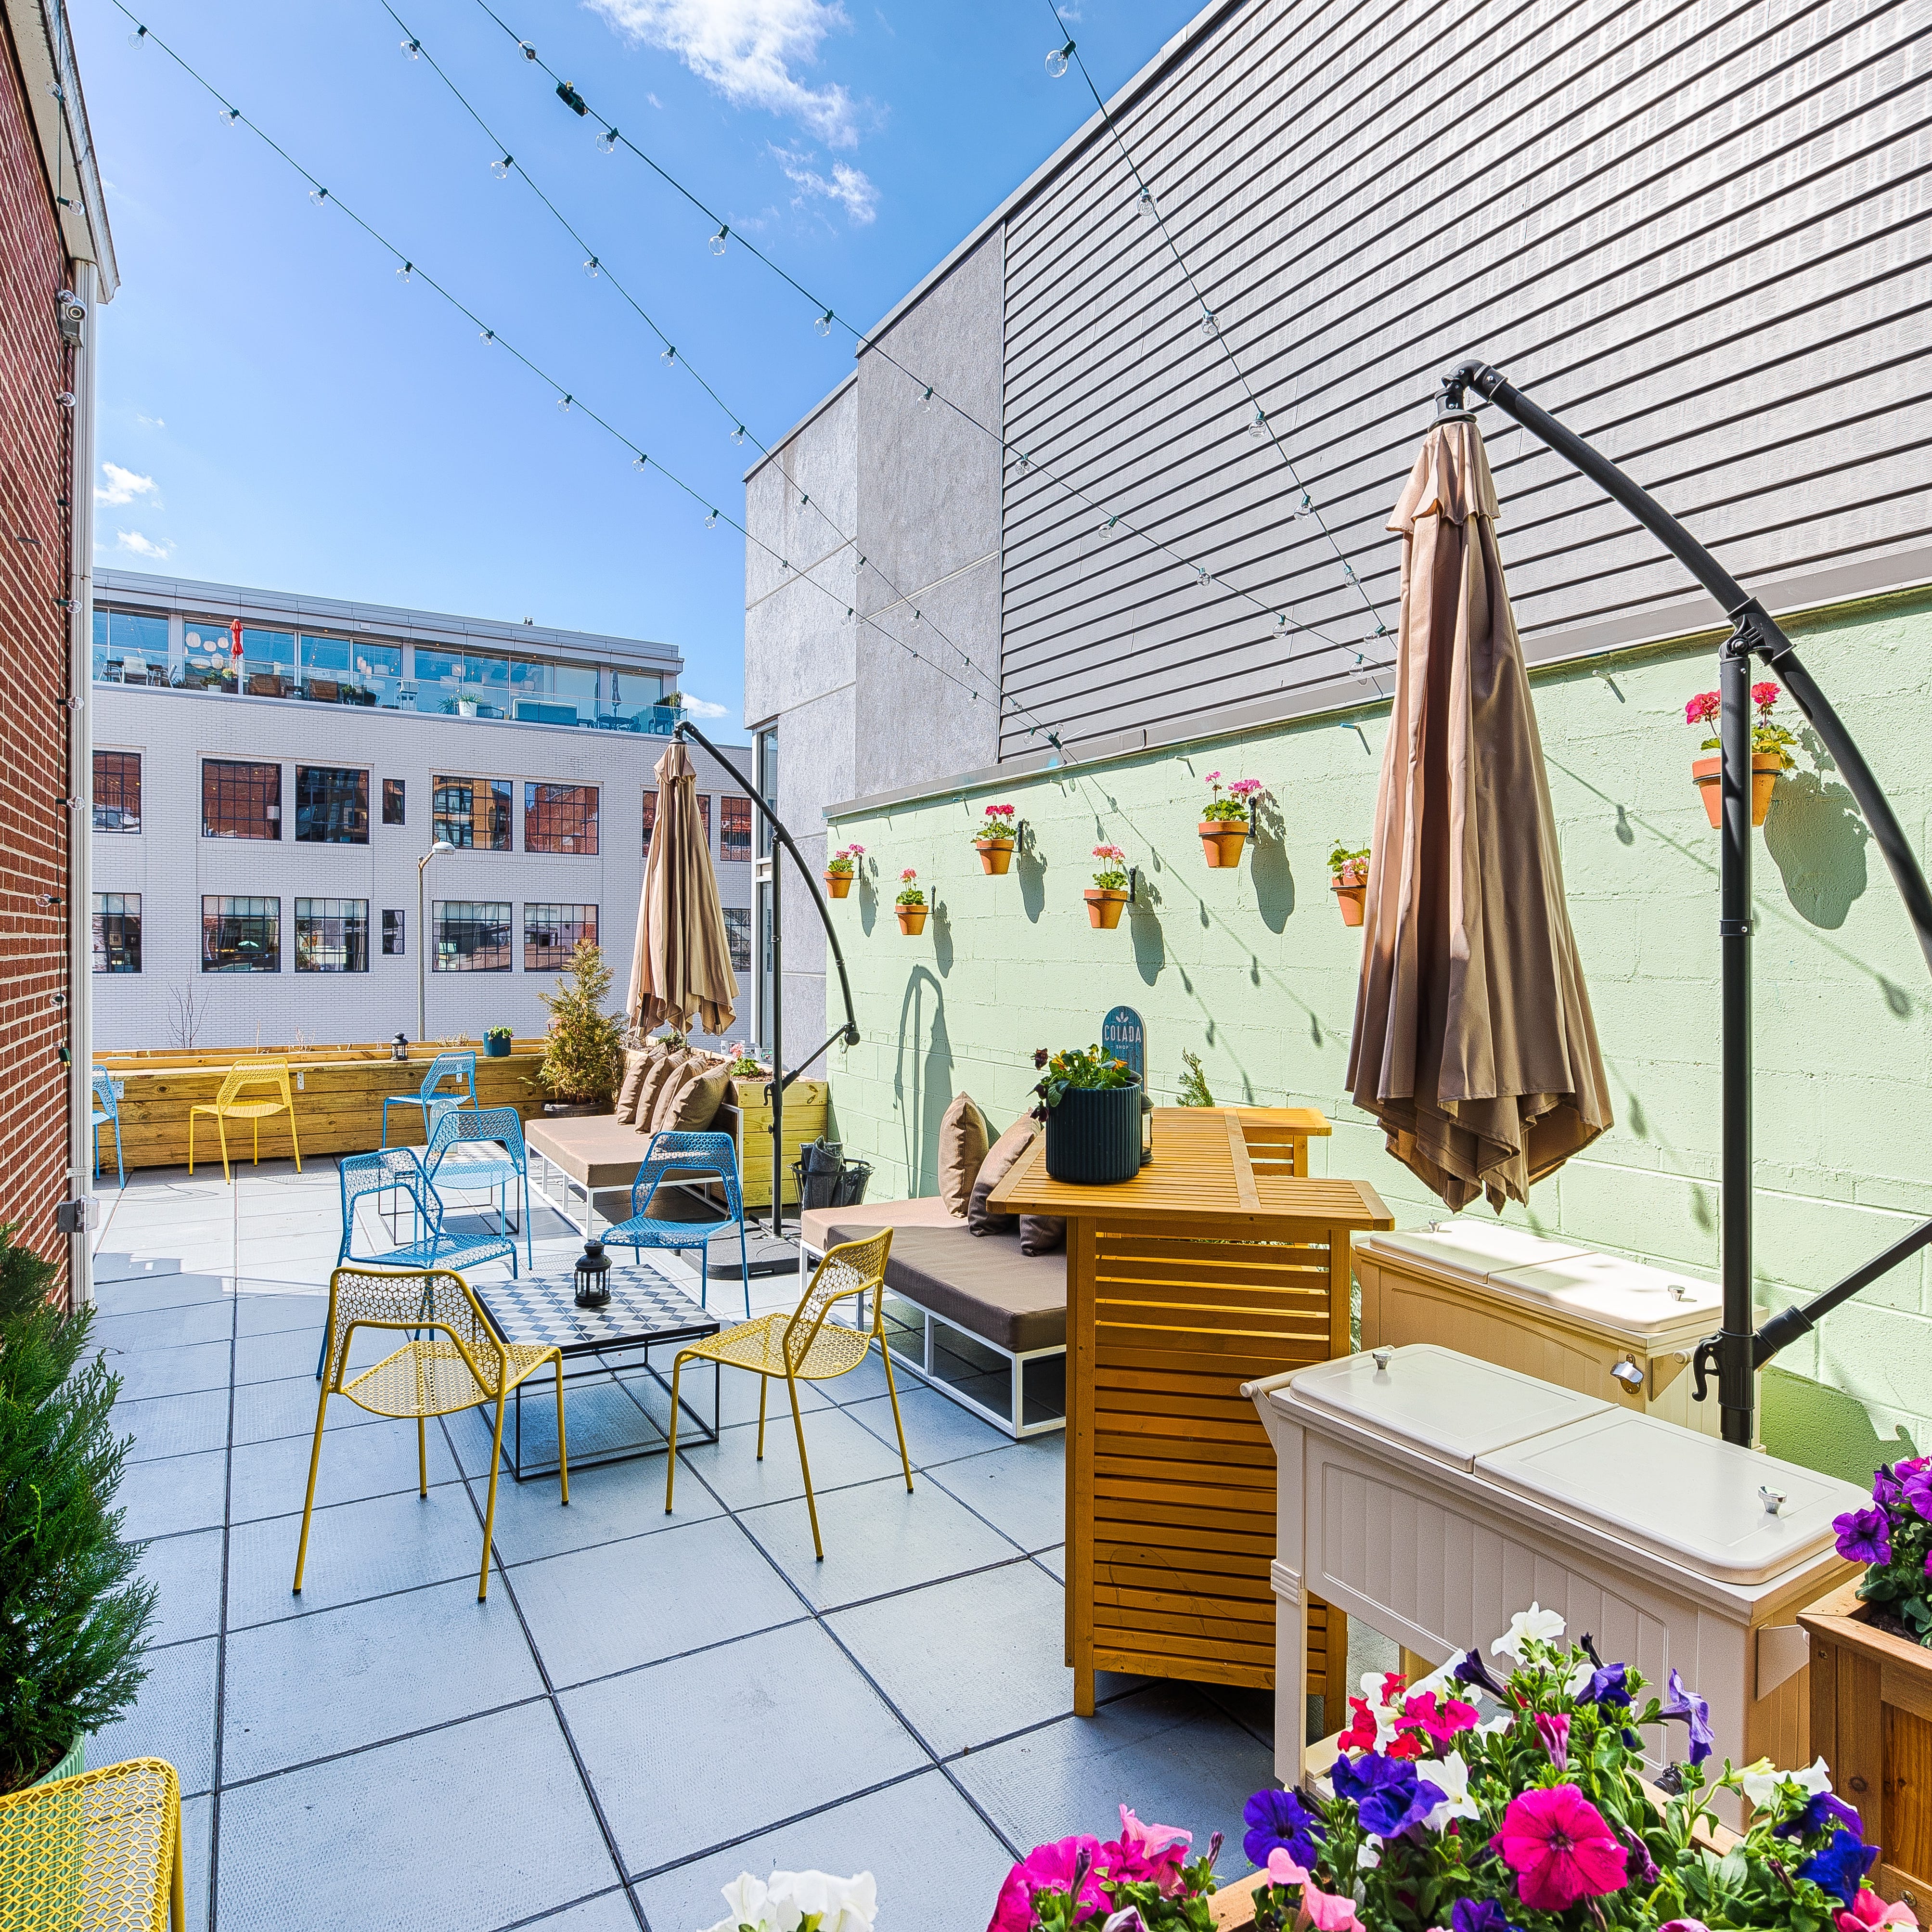 Washington, D.C.'s Colada Shop opened its rooftop garden in April. The Cuban coffee and snack eatery will serve pouched cocktails, mojitos, pineapple sparkling sangria and more with its croquetas, empanadas and pastelitos.